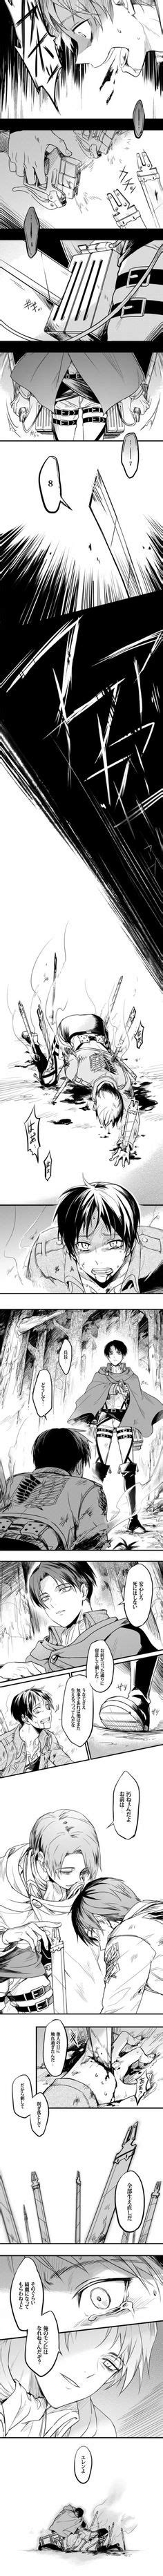 Give that eren was seen as a threat to humans who could potentially devour them all, levi takes full responsibility and states that if eren were to. 59 Best comics (Eren x Levi) images in 2020 | Ereri ...